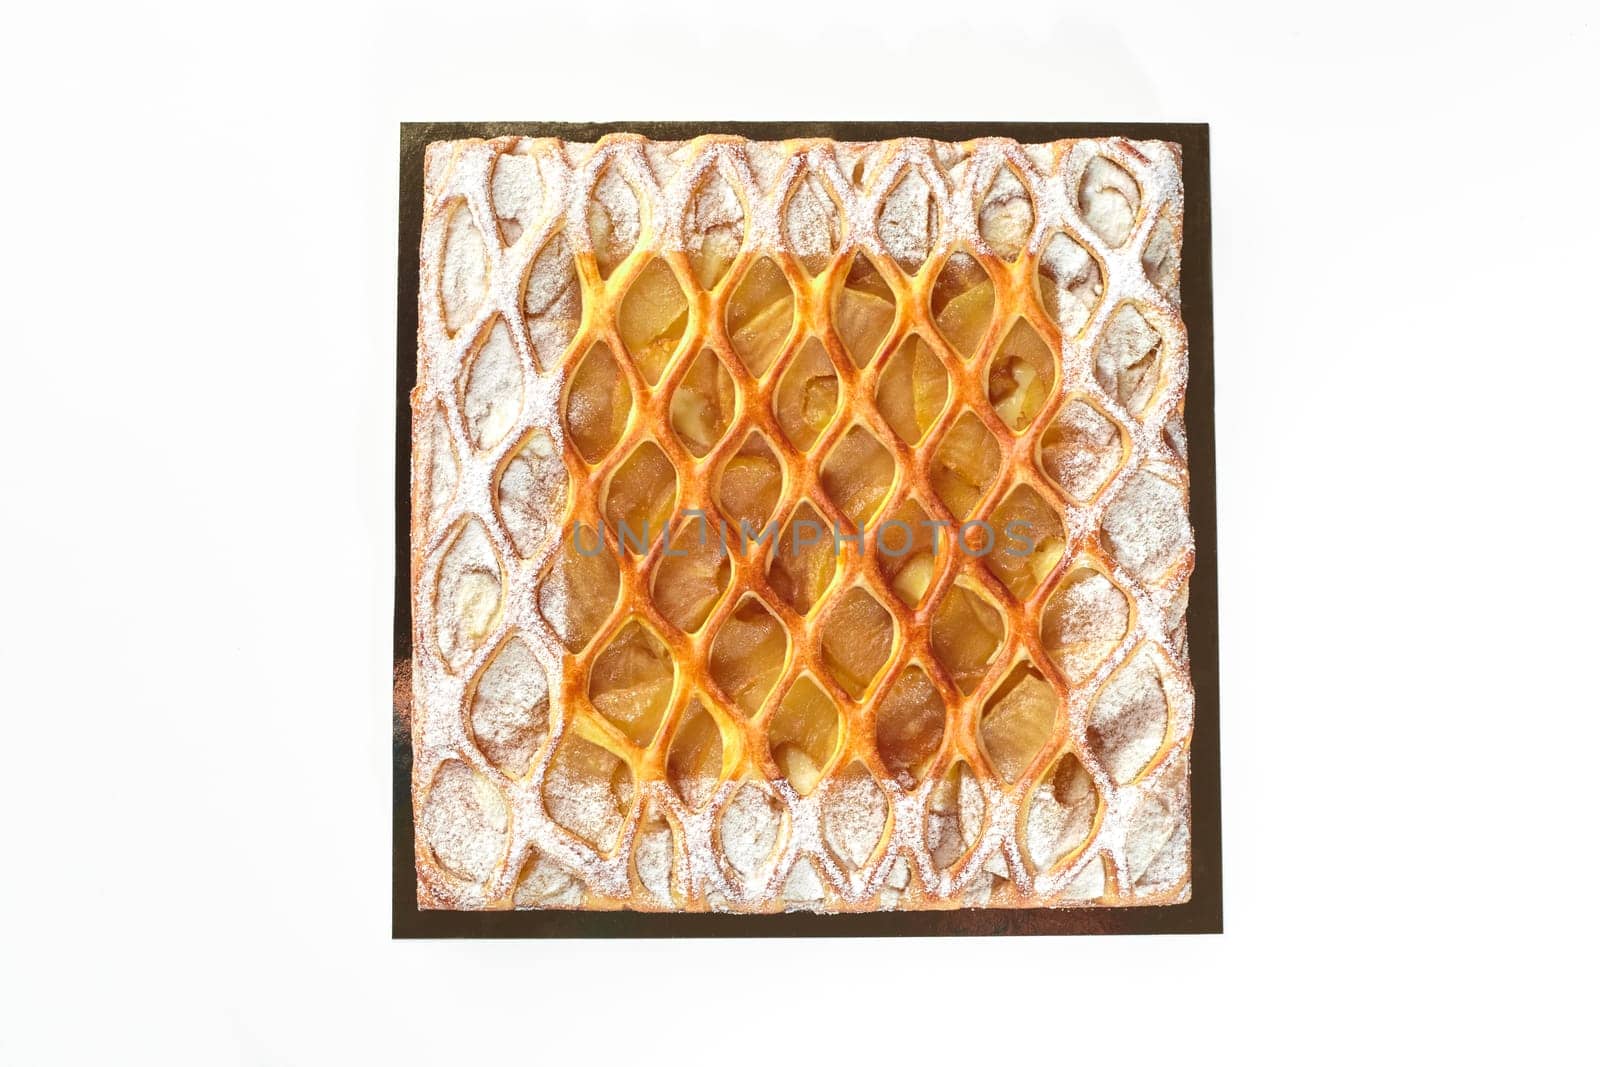 Appetizing artisan crafted pie with caramelized apple slices and custard layer topped with golden lattice, lightly dusted with powdered sugar, top view isolated on white background